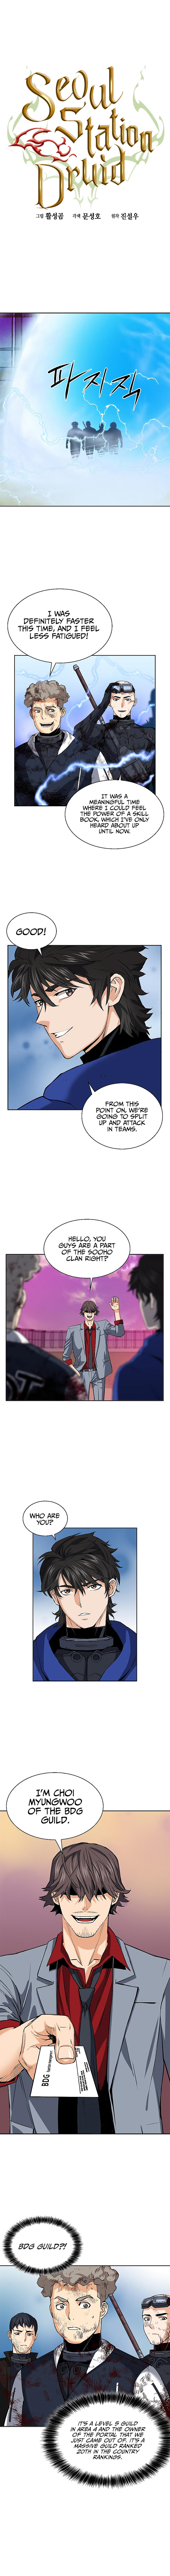 Seoul Station Druid Chapter 24 - Page 2